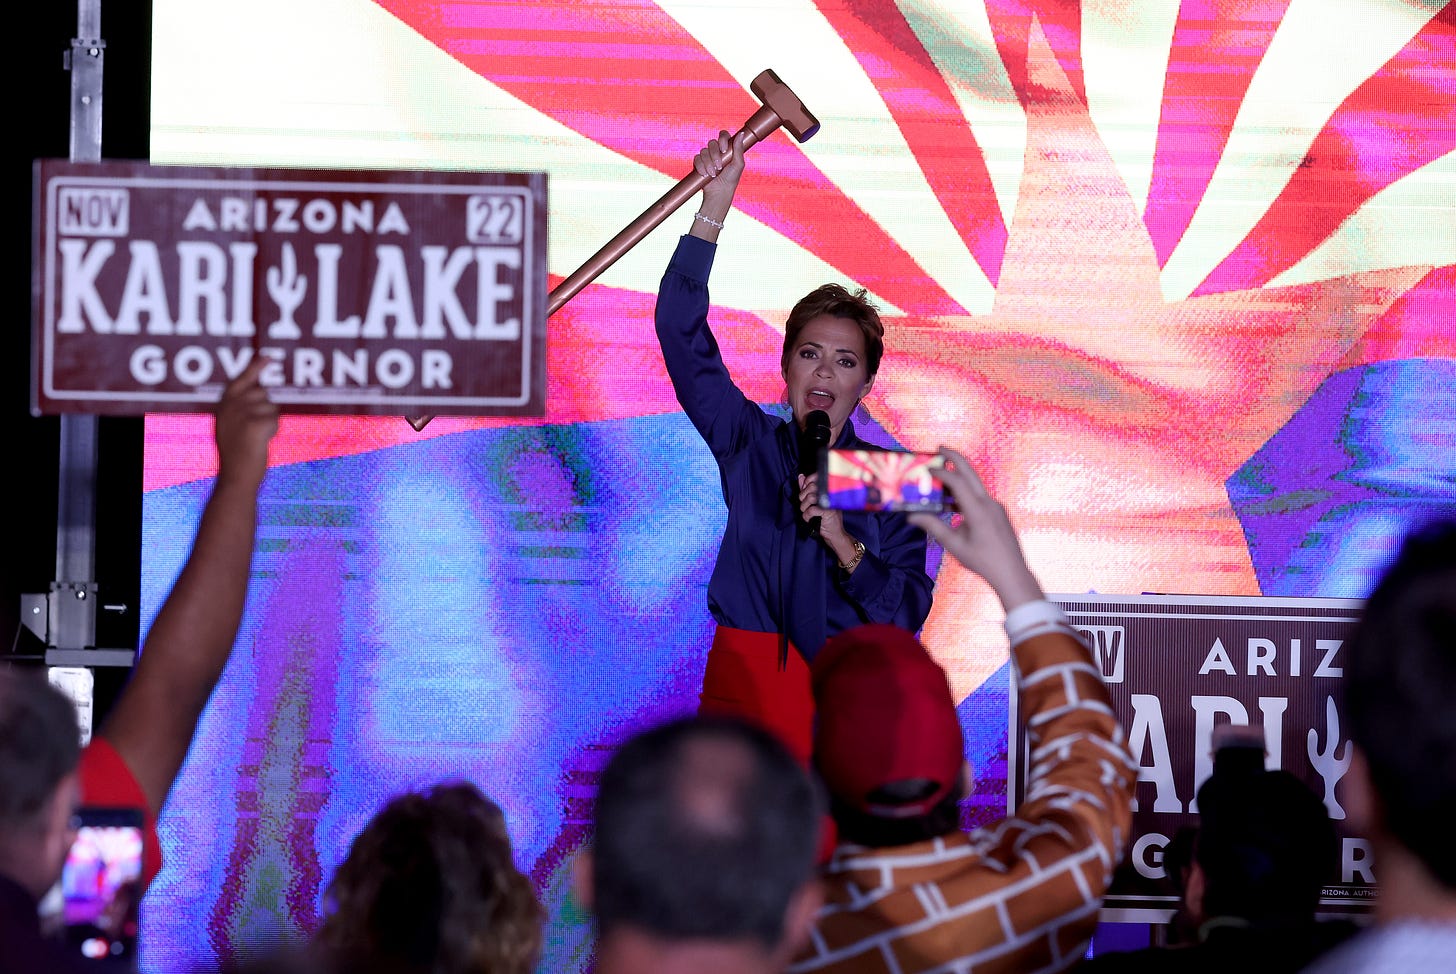 Republican candidate for Arizona Governor Kari Lake holds up a sledgehammer as she speaks to supporters. (Photo by Justin Sullivan/Getty Images).